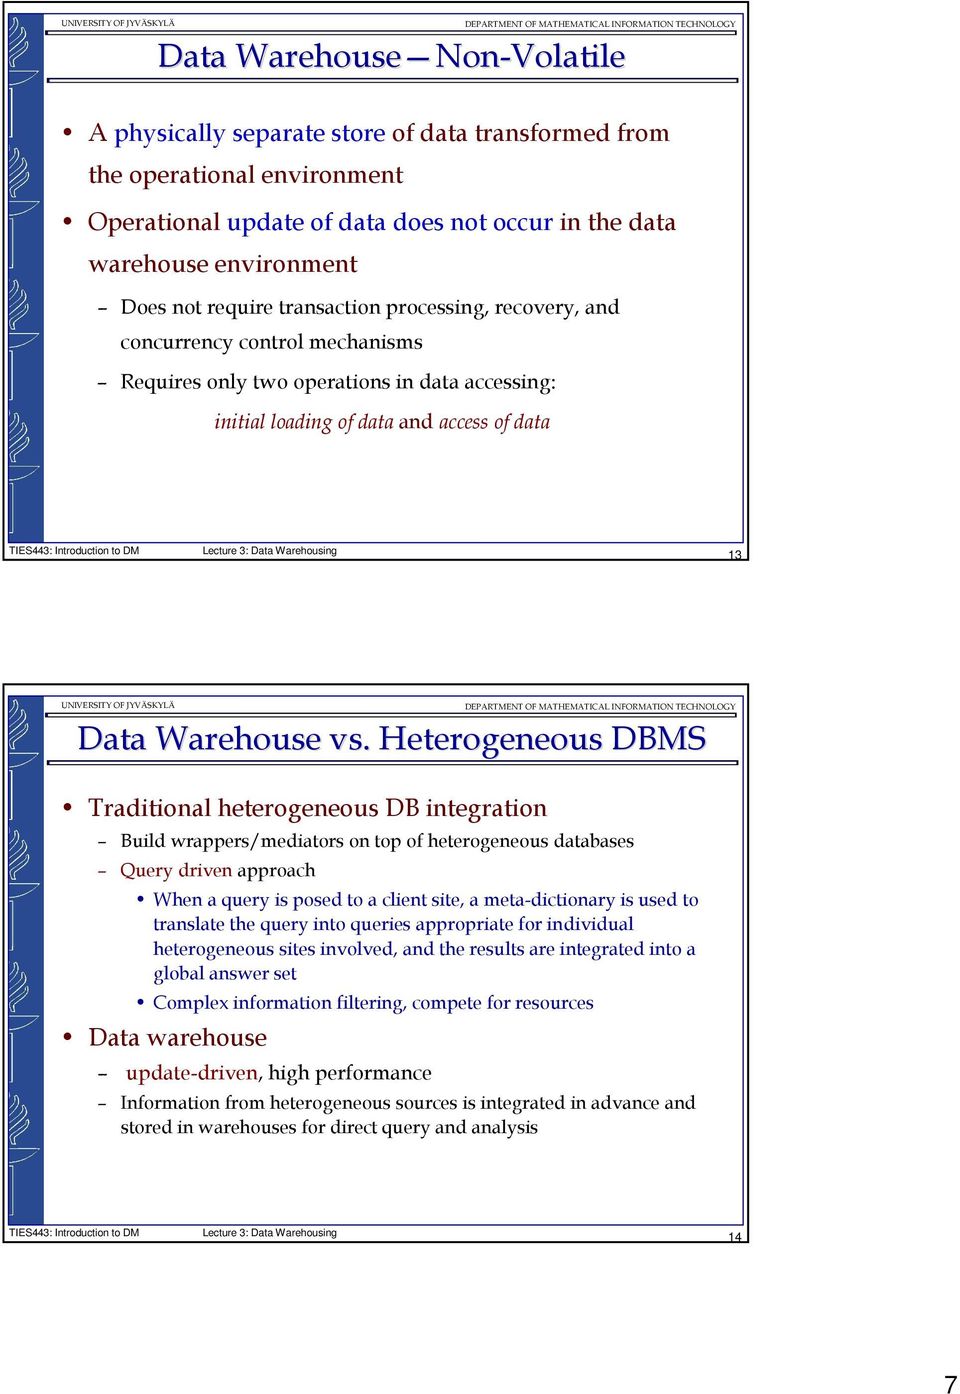 Heterogeneous DBMS Traditional heterogeneous DB integration Build wrappers/mediators on top of heterogeneous databases Query driven approach When a query is posed to a client site, a meta-dictionary